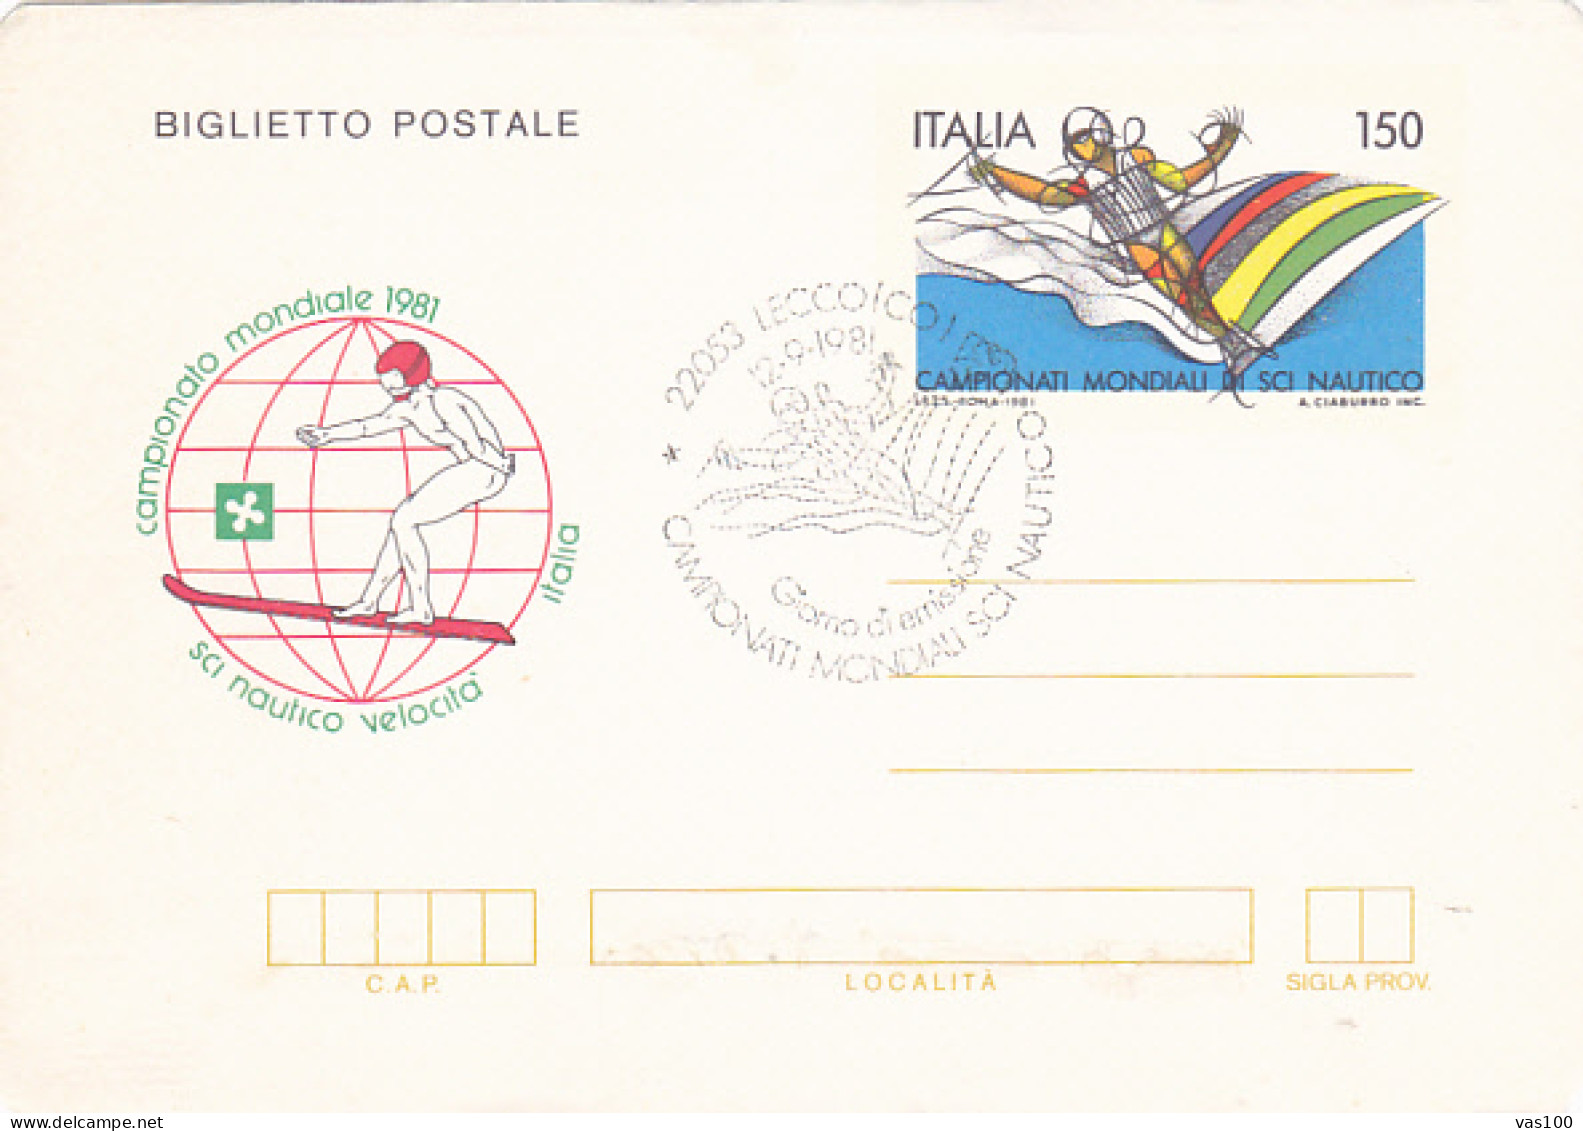 SPORTS, WATER SKIING, WORLD CHAMPIONSHIP, LETTERCARD STATIONERY, ENTIER POSTAL, OBKIT FDC, 1981, ITALY - Sci Nautico